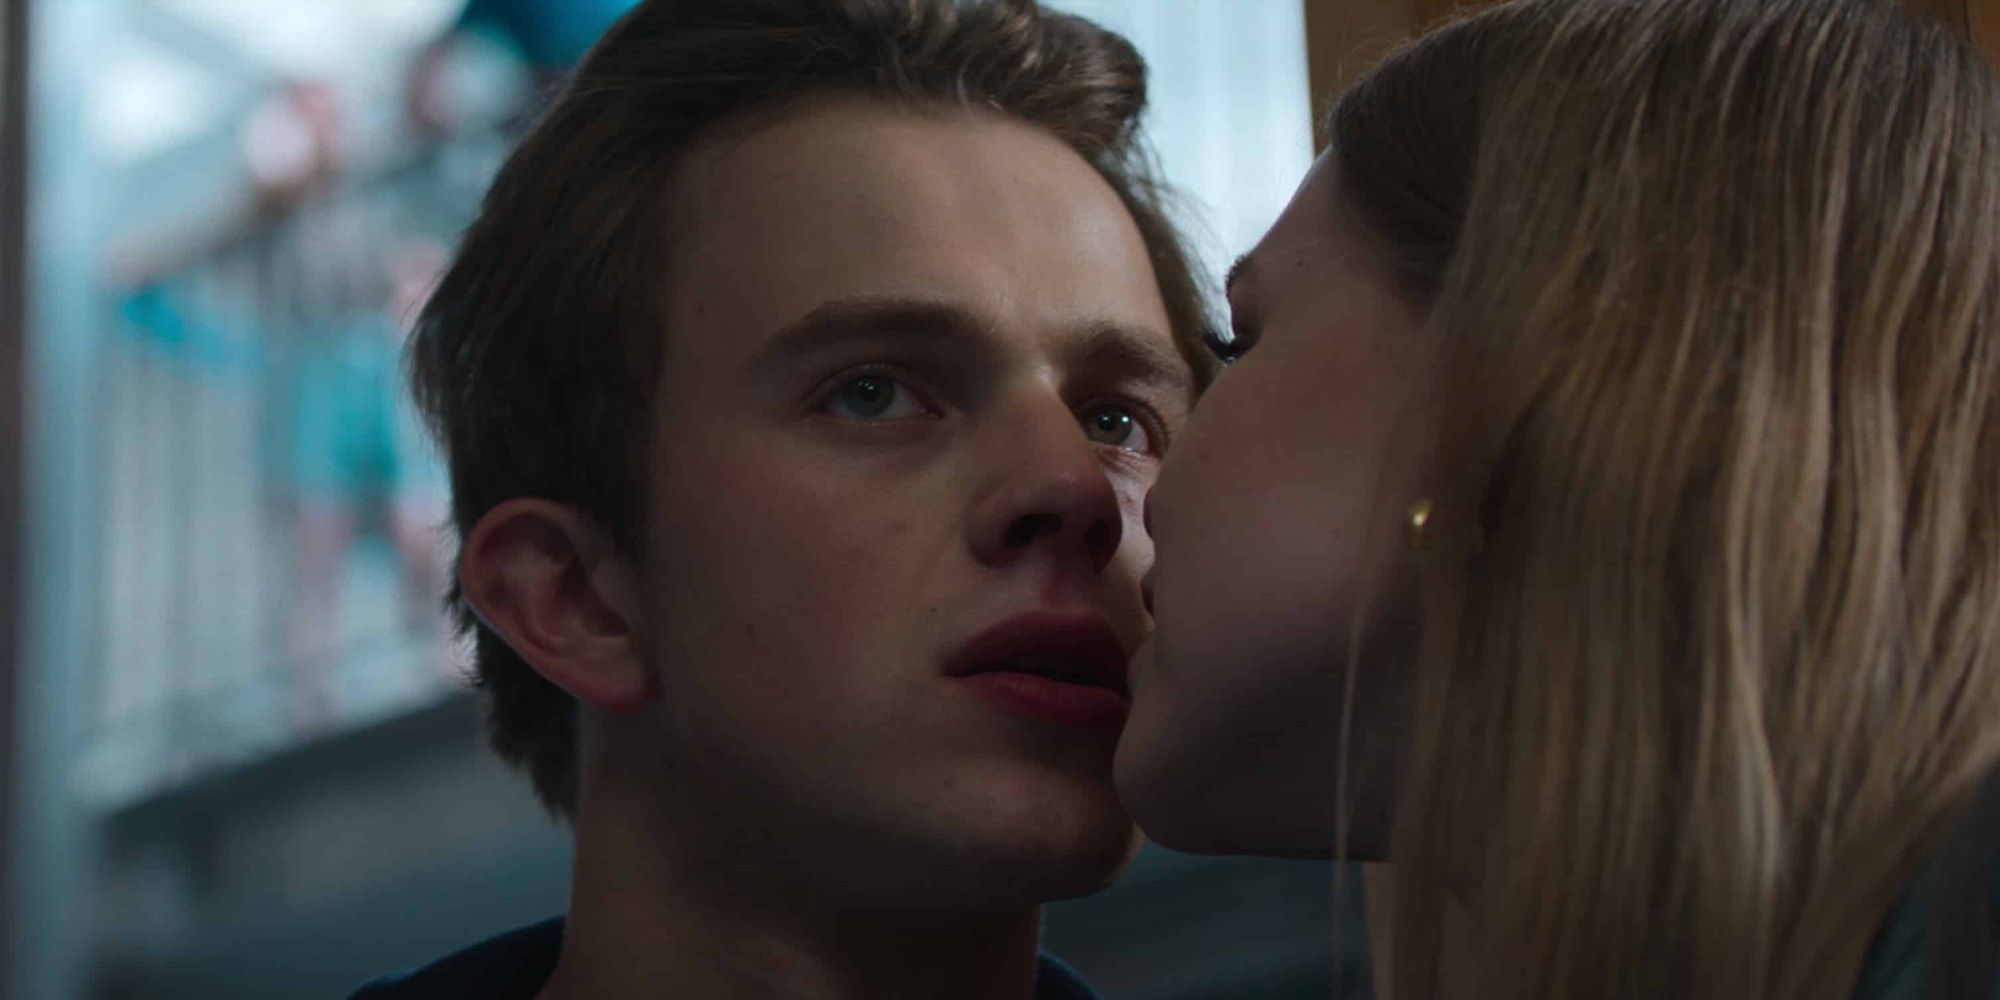 Krzysztof Oleksyn kissing in Hold Tight.